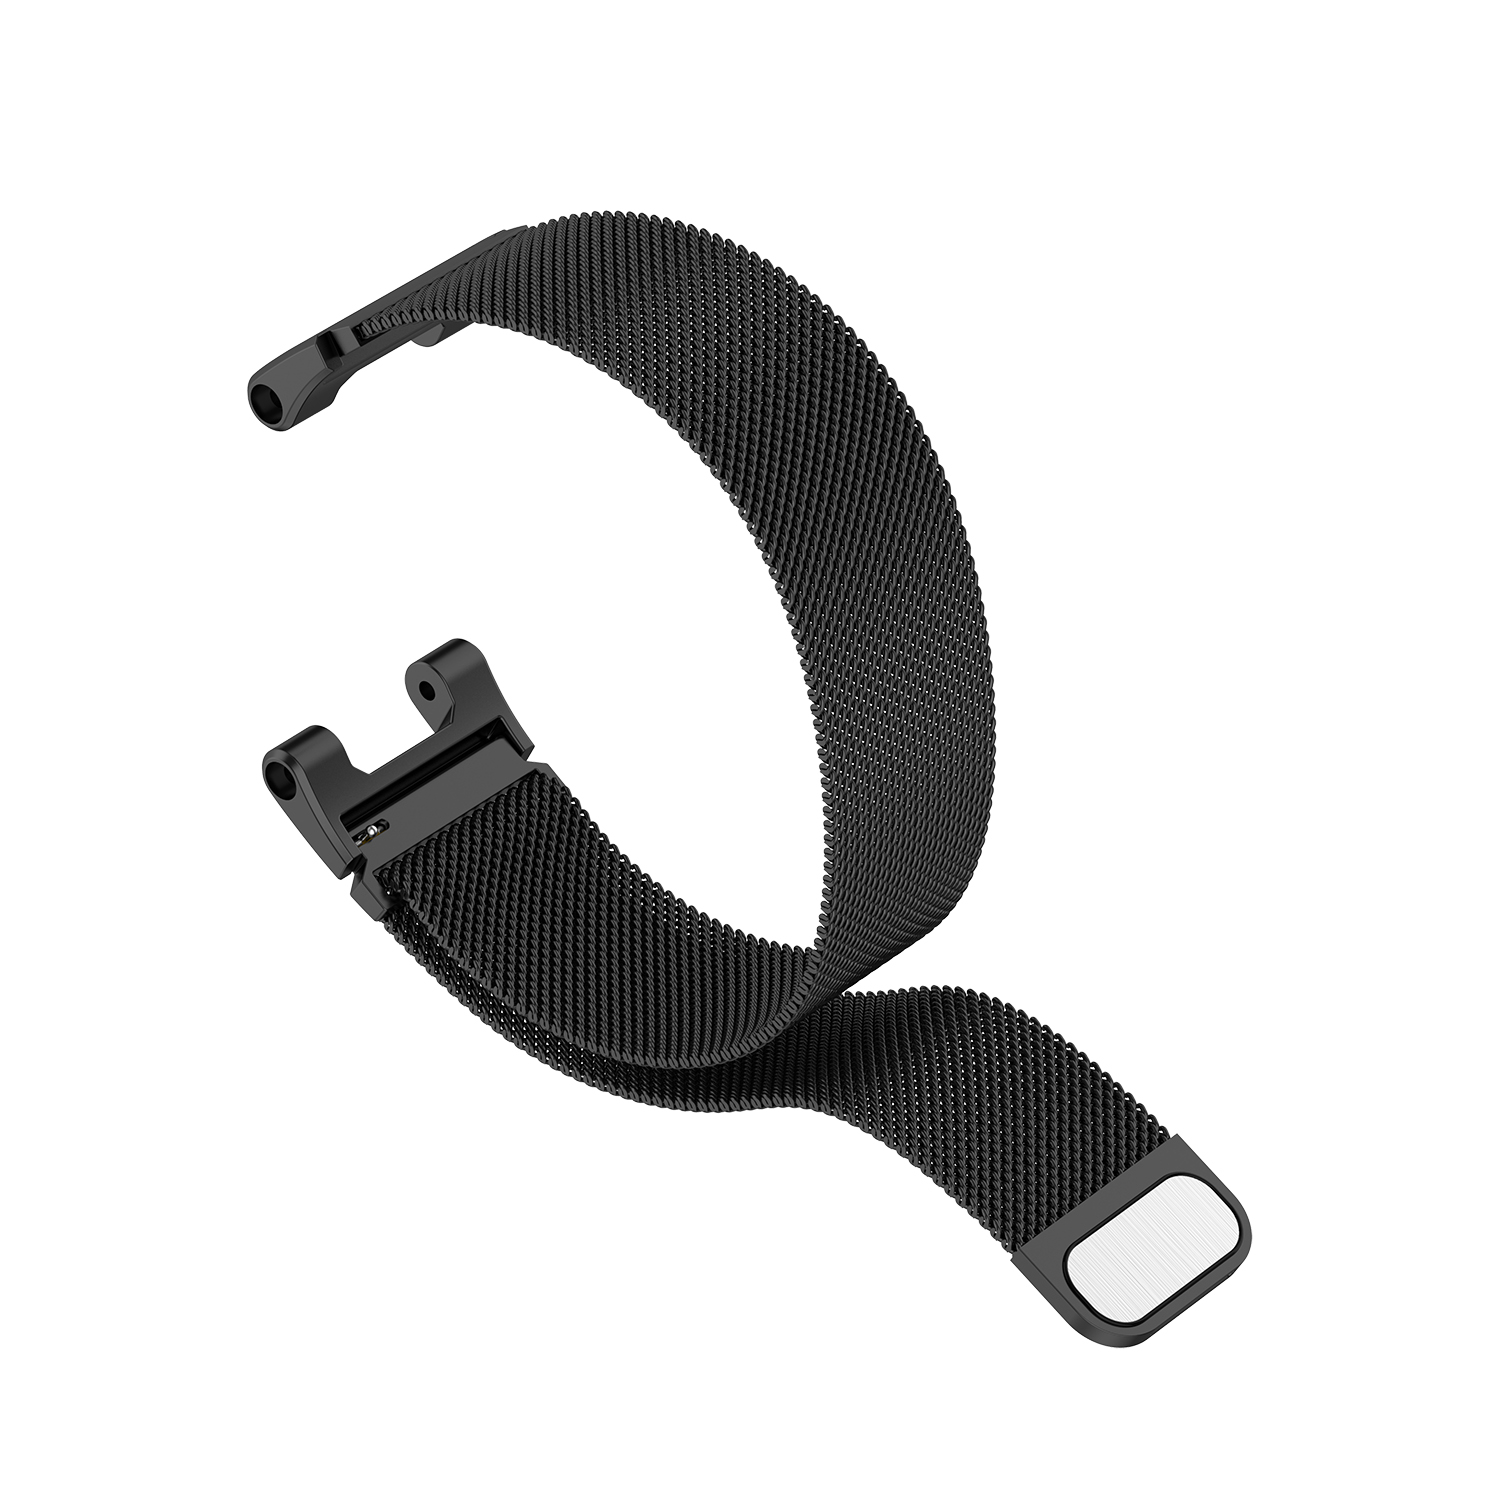 Bakeey-Milanese-Stainless-Steel-Strap-Watch-Band-Watch-Strap-Replacement-for-Amazfit-Ares-1748296-4